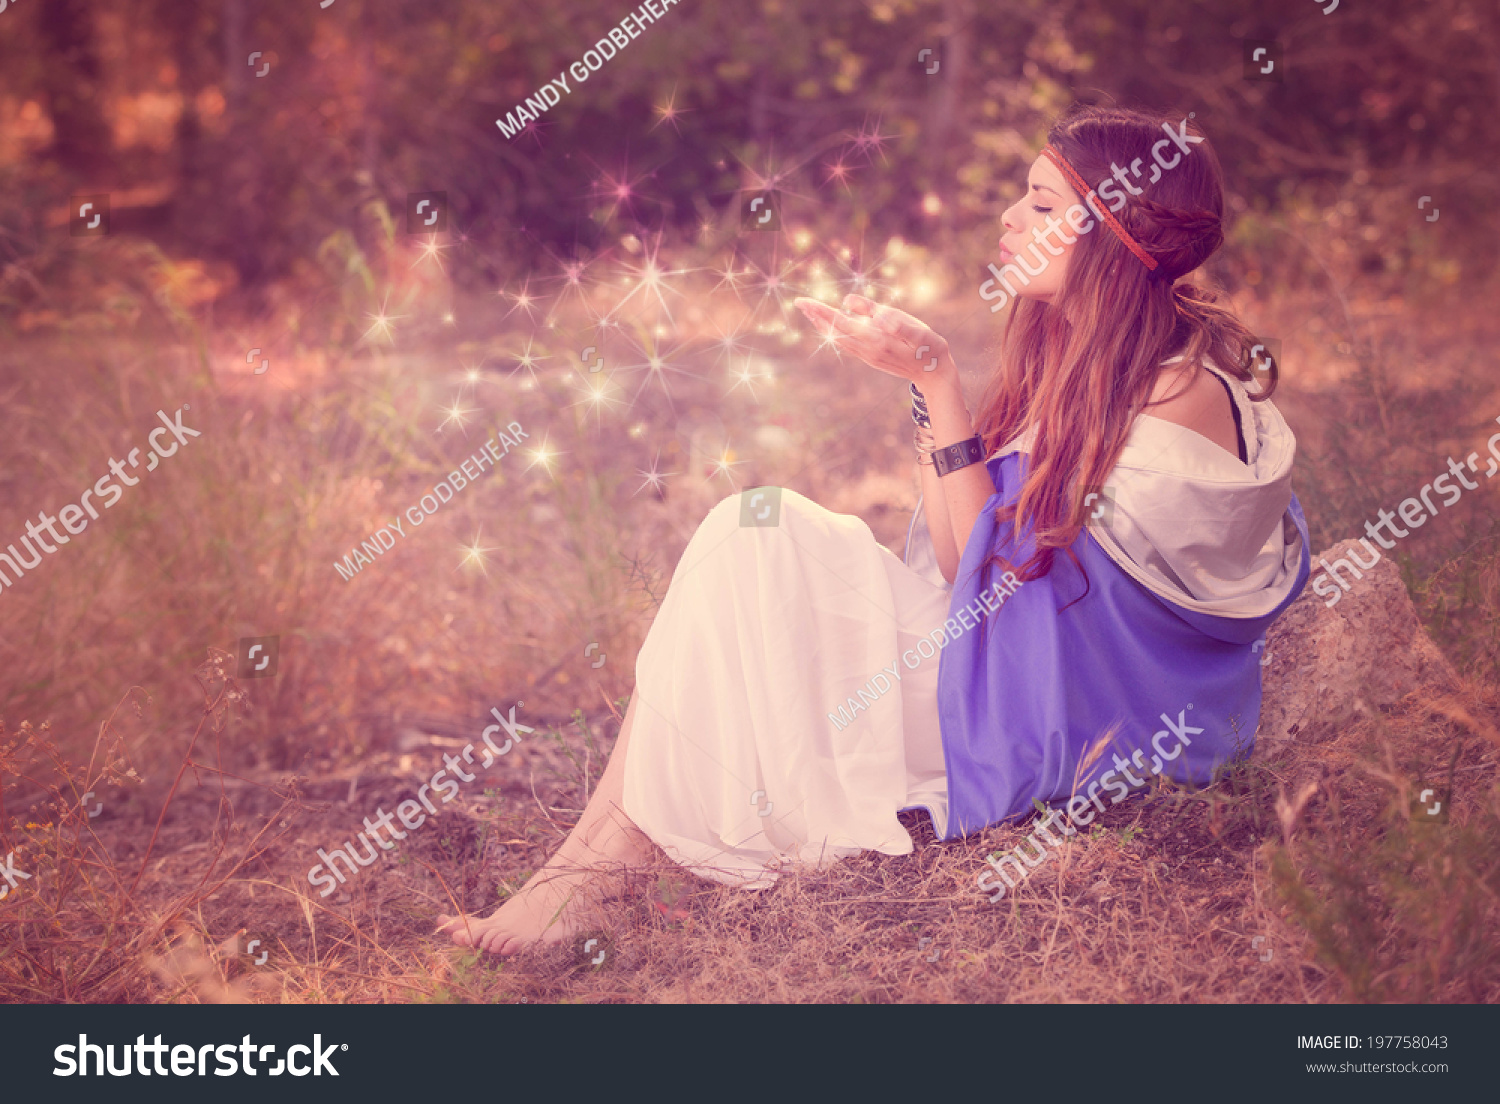 https://image.shutterstock.com/shutterstock/photos/197758043/display_1500/stock-photo-woman-blowing-wishes-in-forest-fairy-or-elf-197758043.jpg